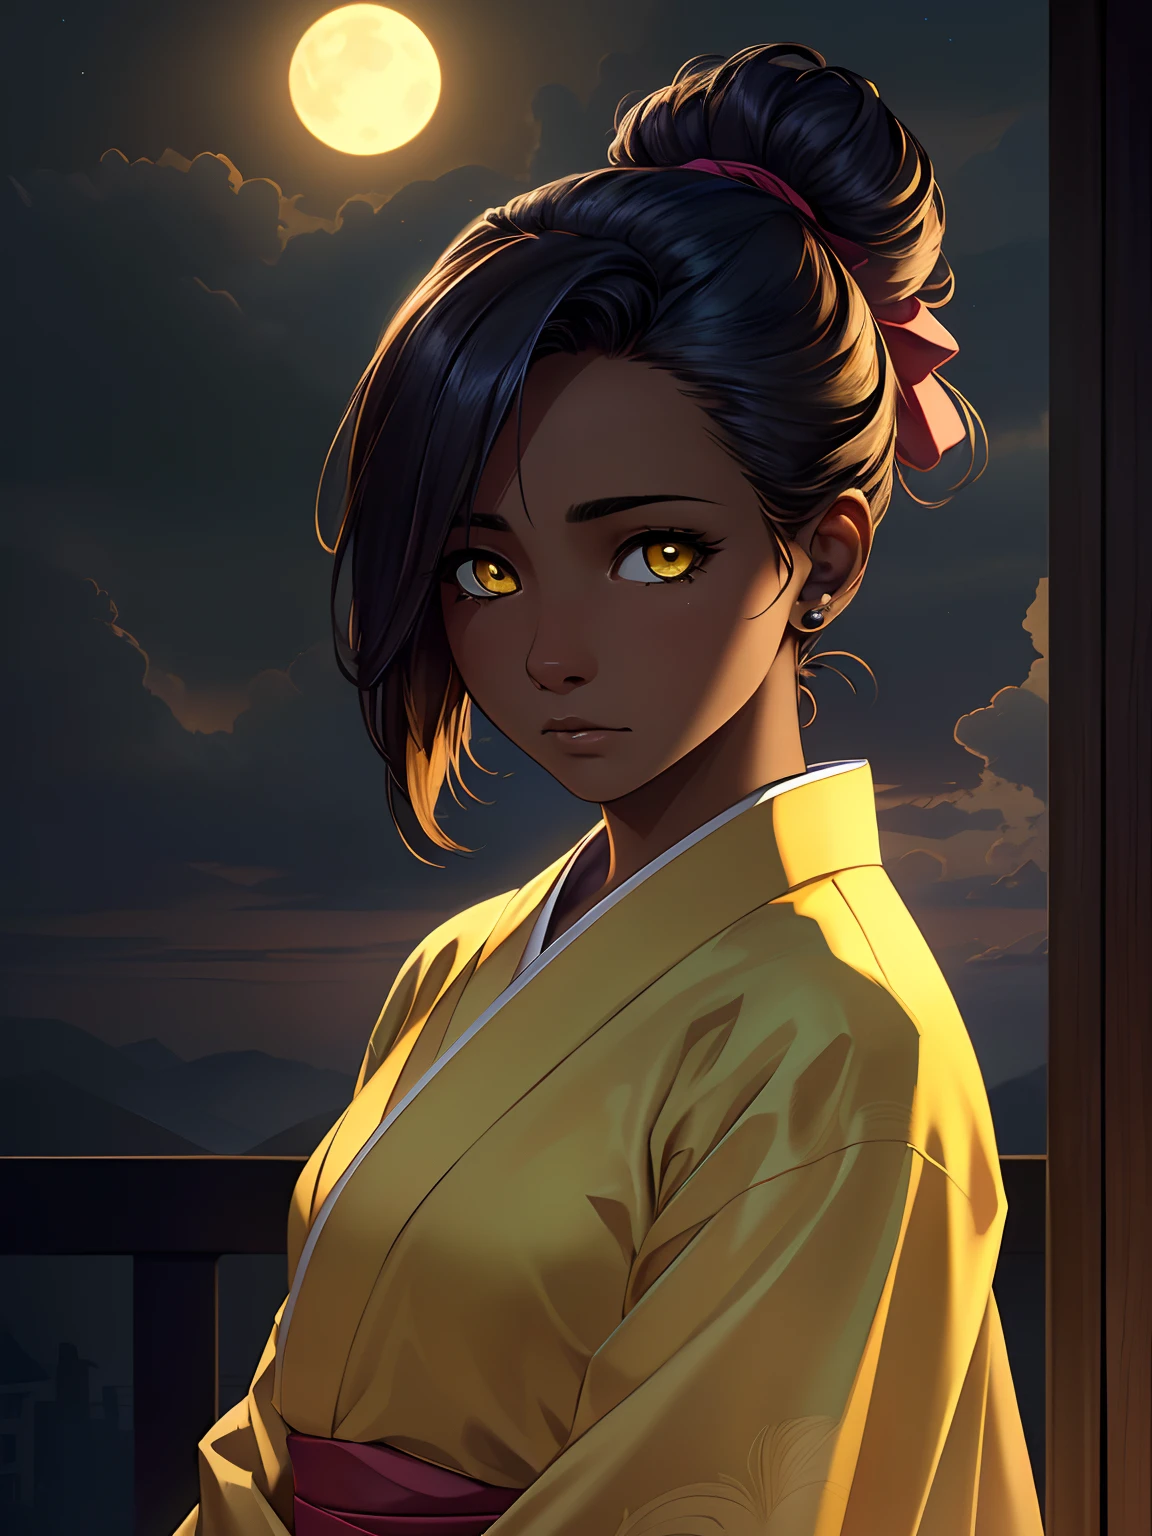 1 girl, (dark skin:1.2), shy, cute, cold expression, (8k, RAW photo, best quality, masterpiece:1.2), (realistic, photorealistic:1.2) (ultra-detailed, Super detailed:1.2), vivid colors, studio lighting, Yellow coloured eyes, blank eyes, Night clouds background, Aesthetic, romantic, Luna, Wearing a kimono, short swept back hair